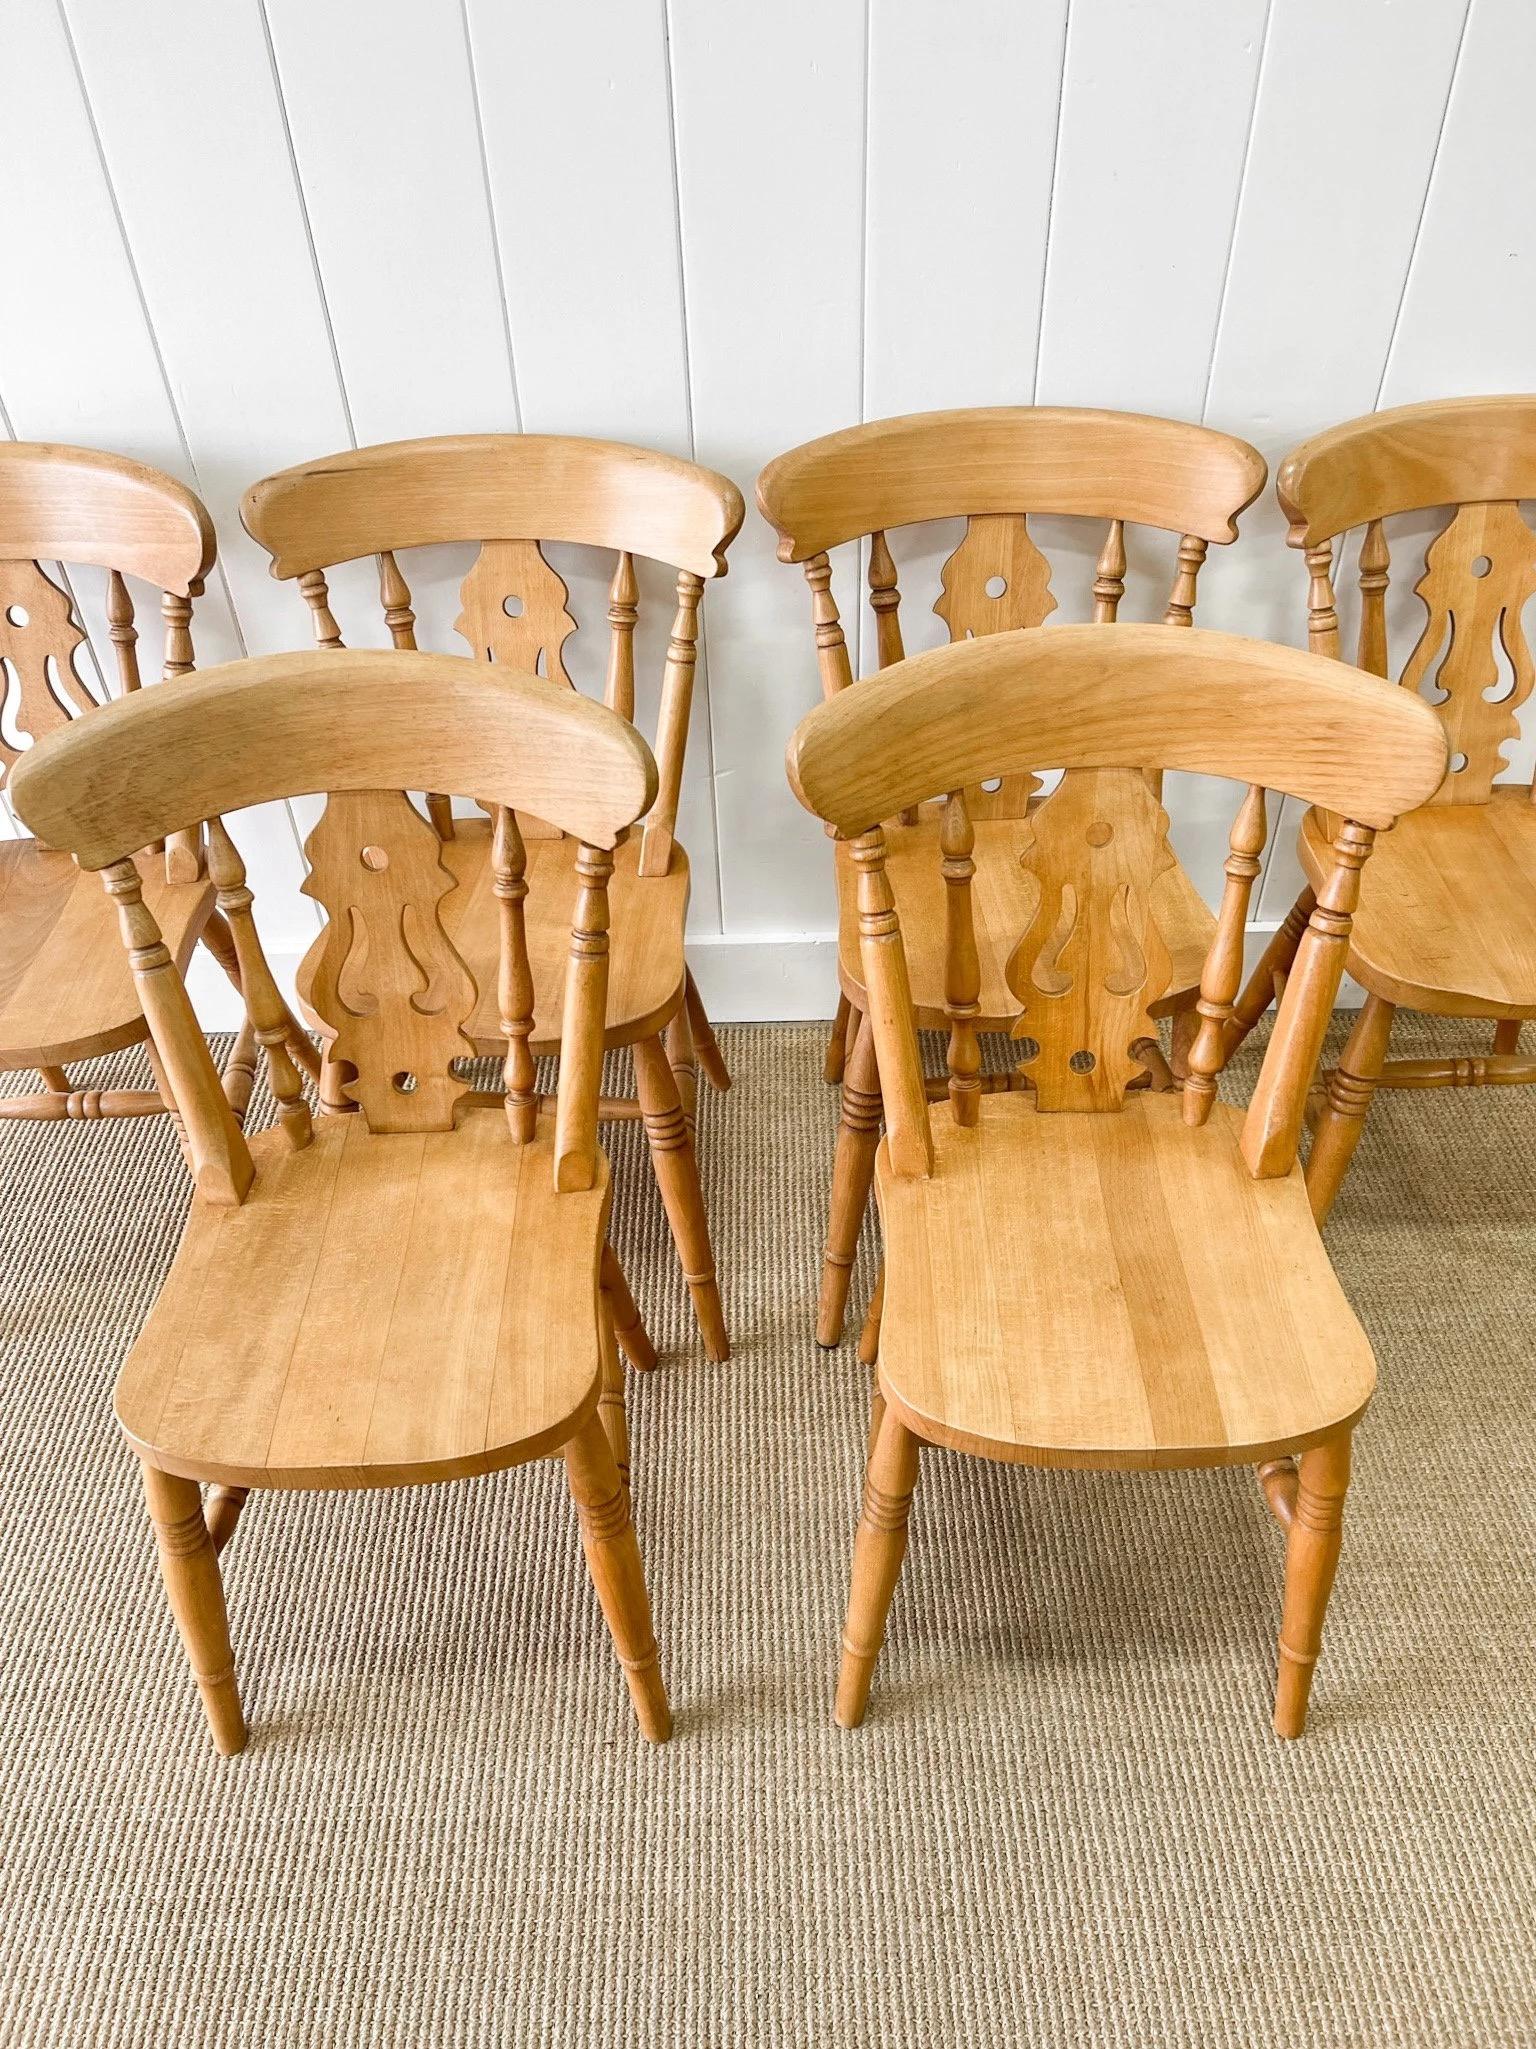 Victorian A Vintage Set of 6 Fiddleback Chairs For Sale